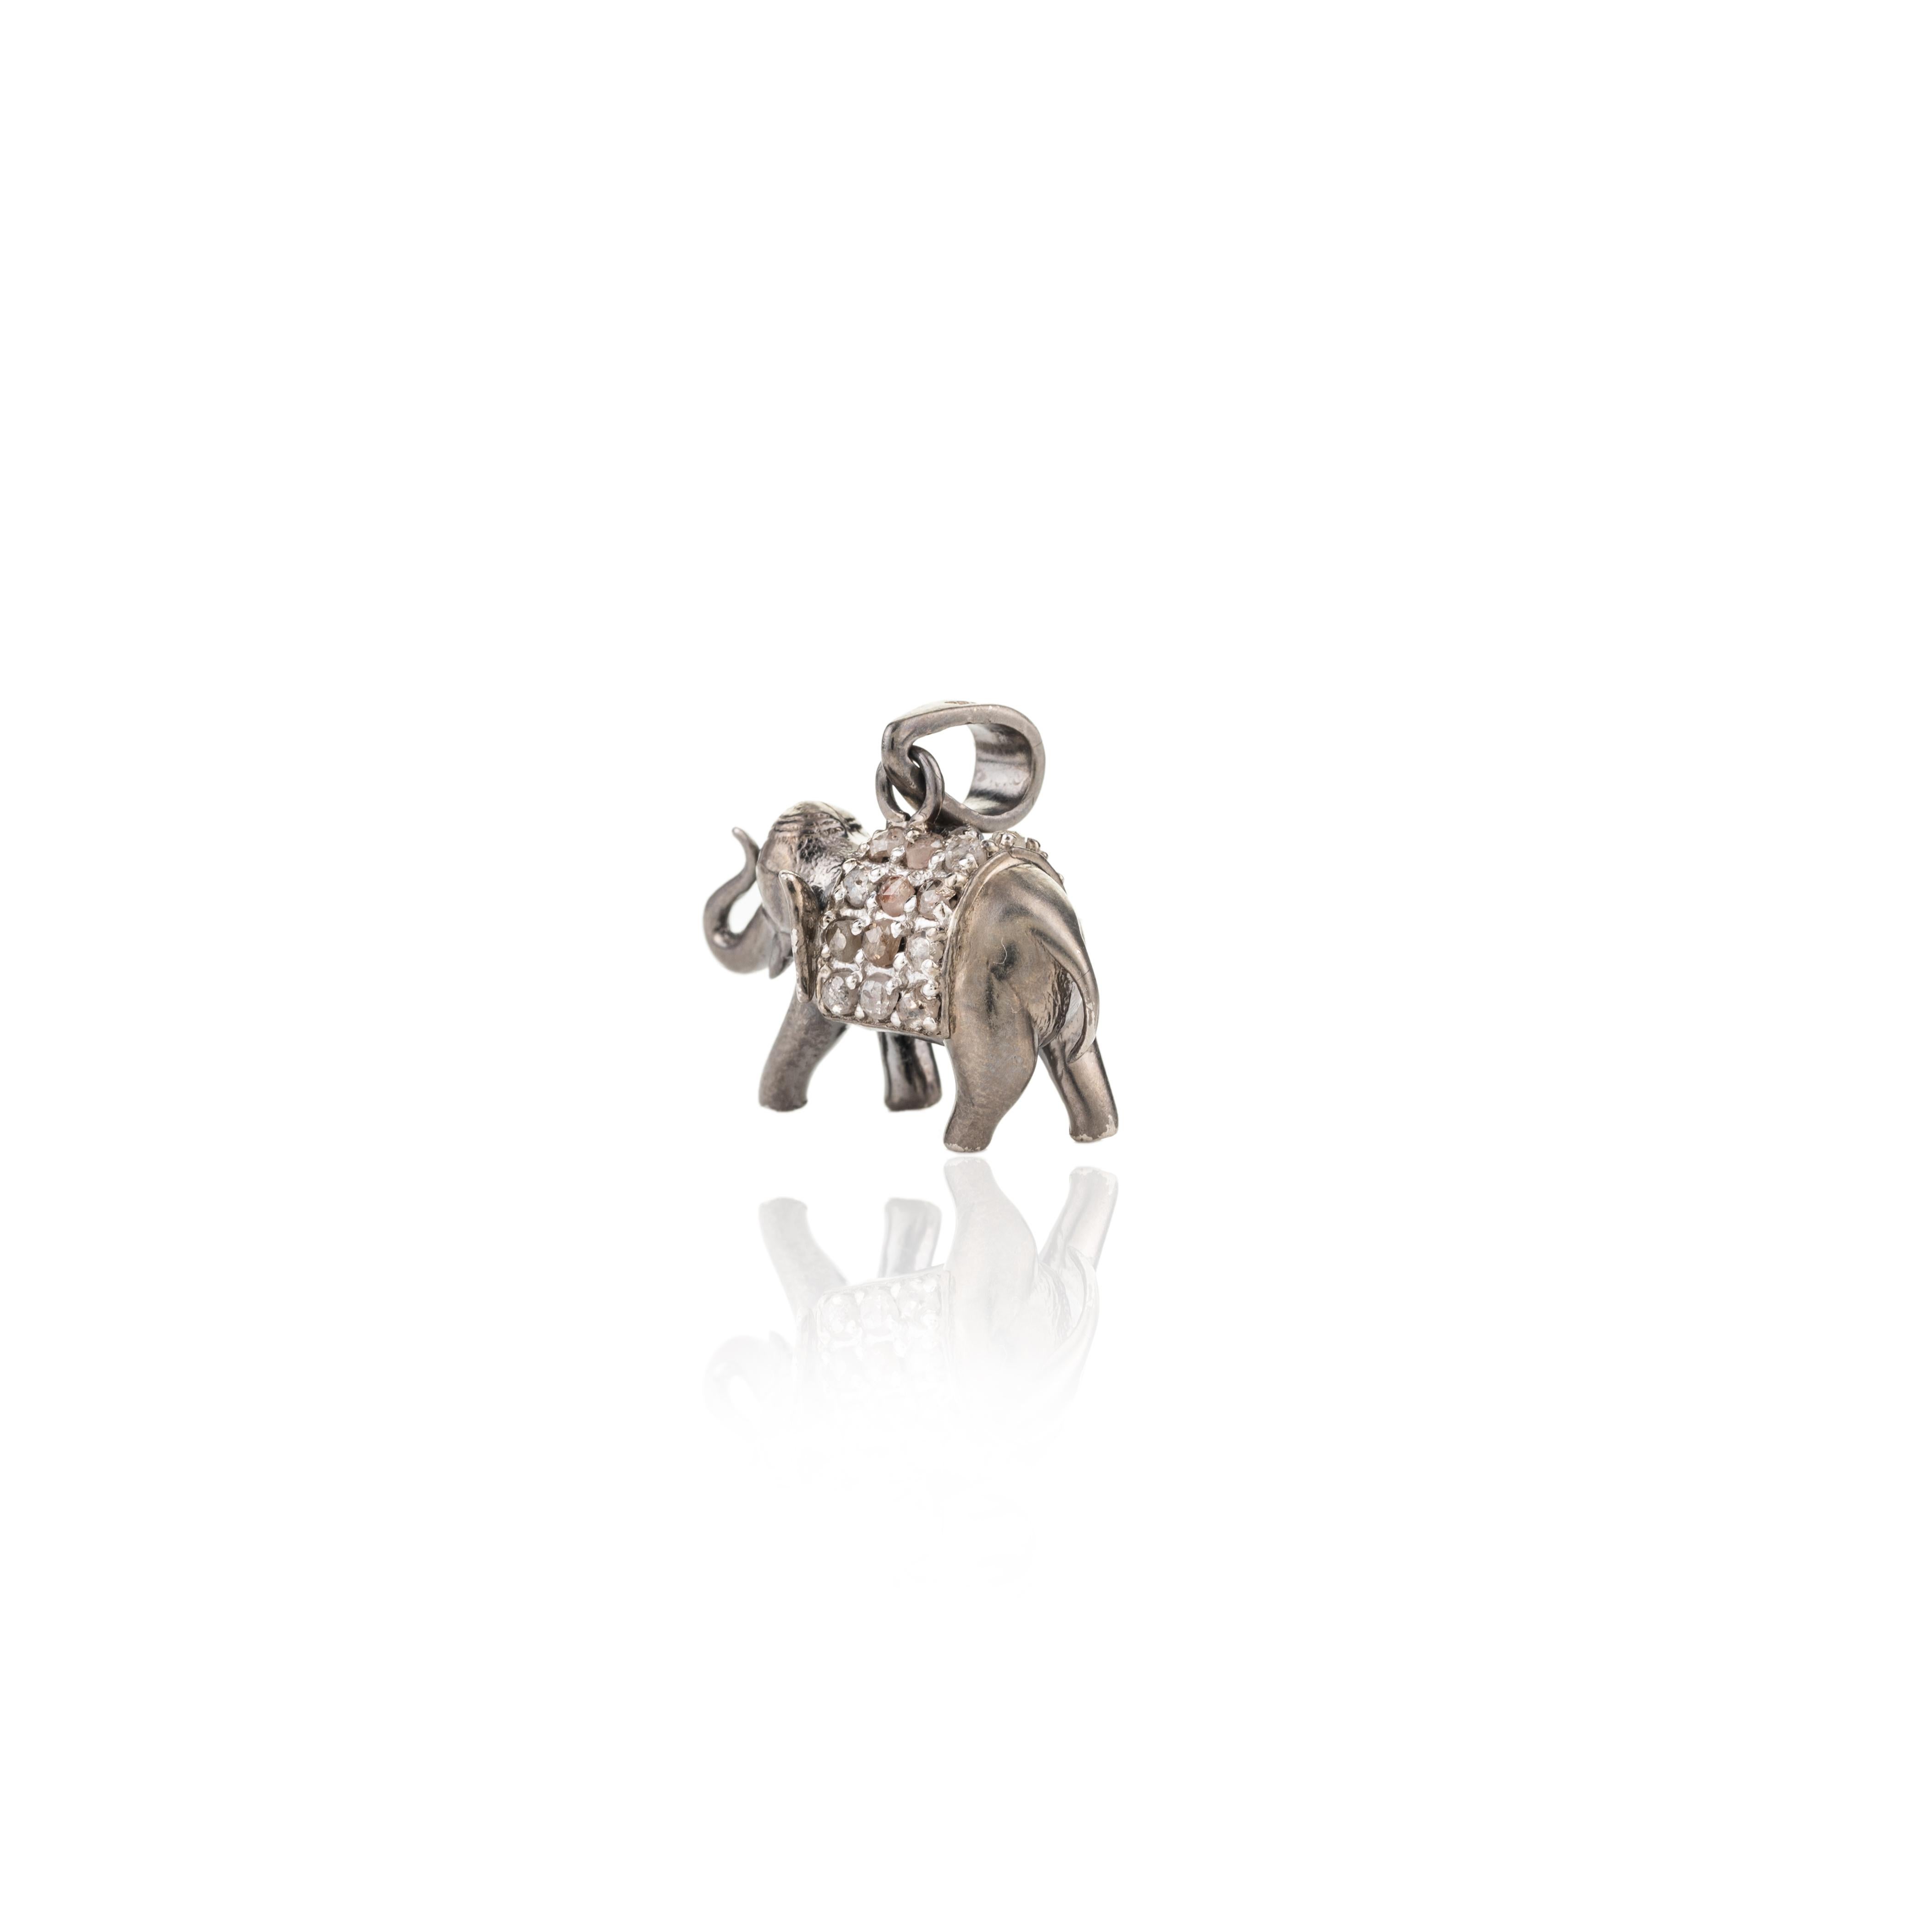 Contemporary Vintage Style 925 Sterling Silver Diamond Elephant Pendant Unisex Gifts For Sale